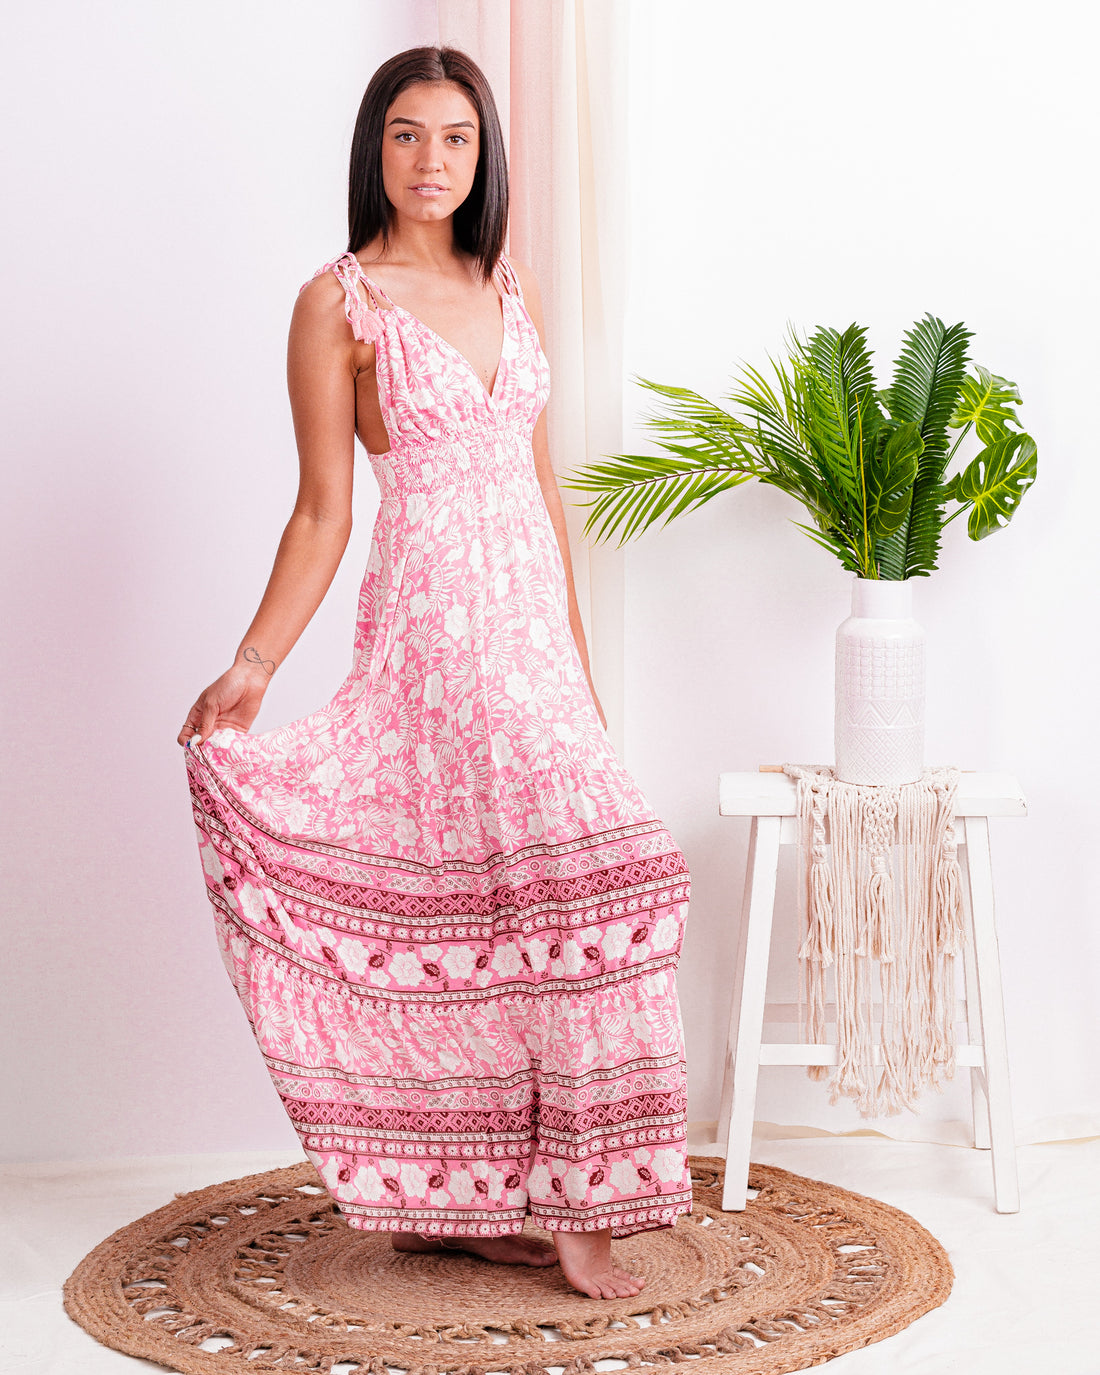 Can't Get Past This Moment Floral Maxi Dress - Truelynn Clothing Company